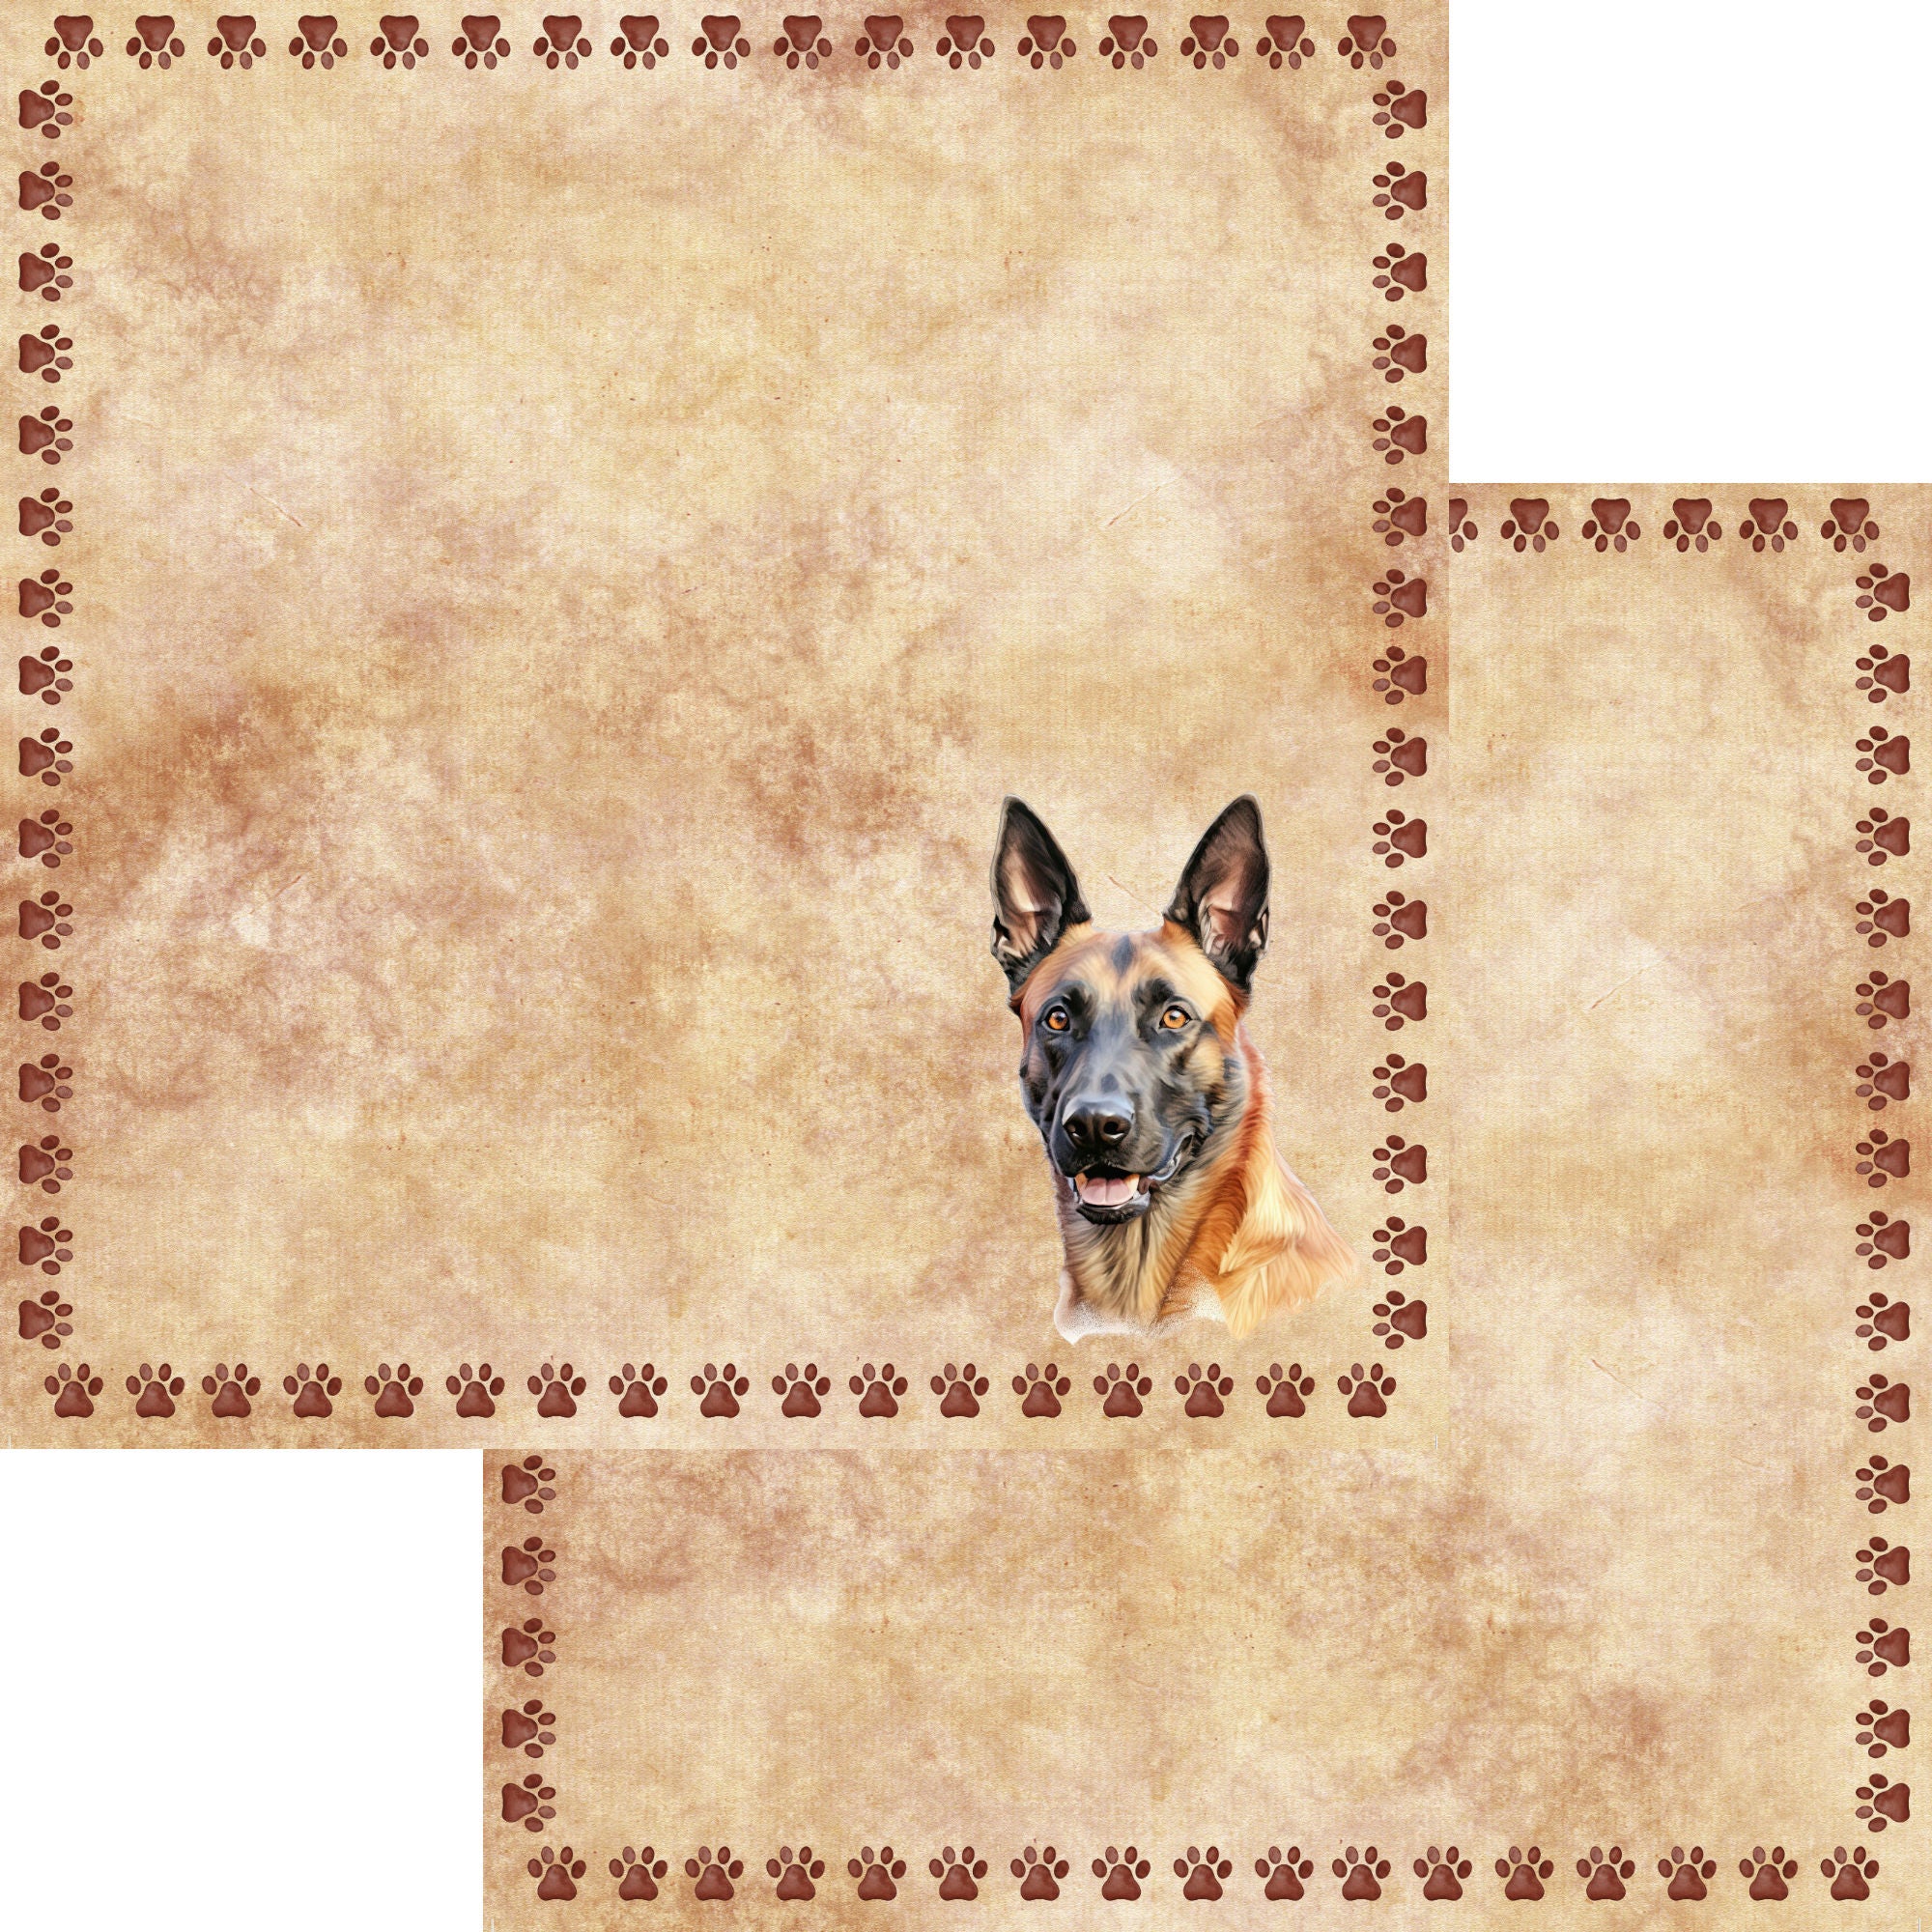 Dog Breeds Collection Belgian Malinois 12 x 12 Double-Sided Scrapbook Paper by SSC Designs